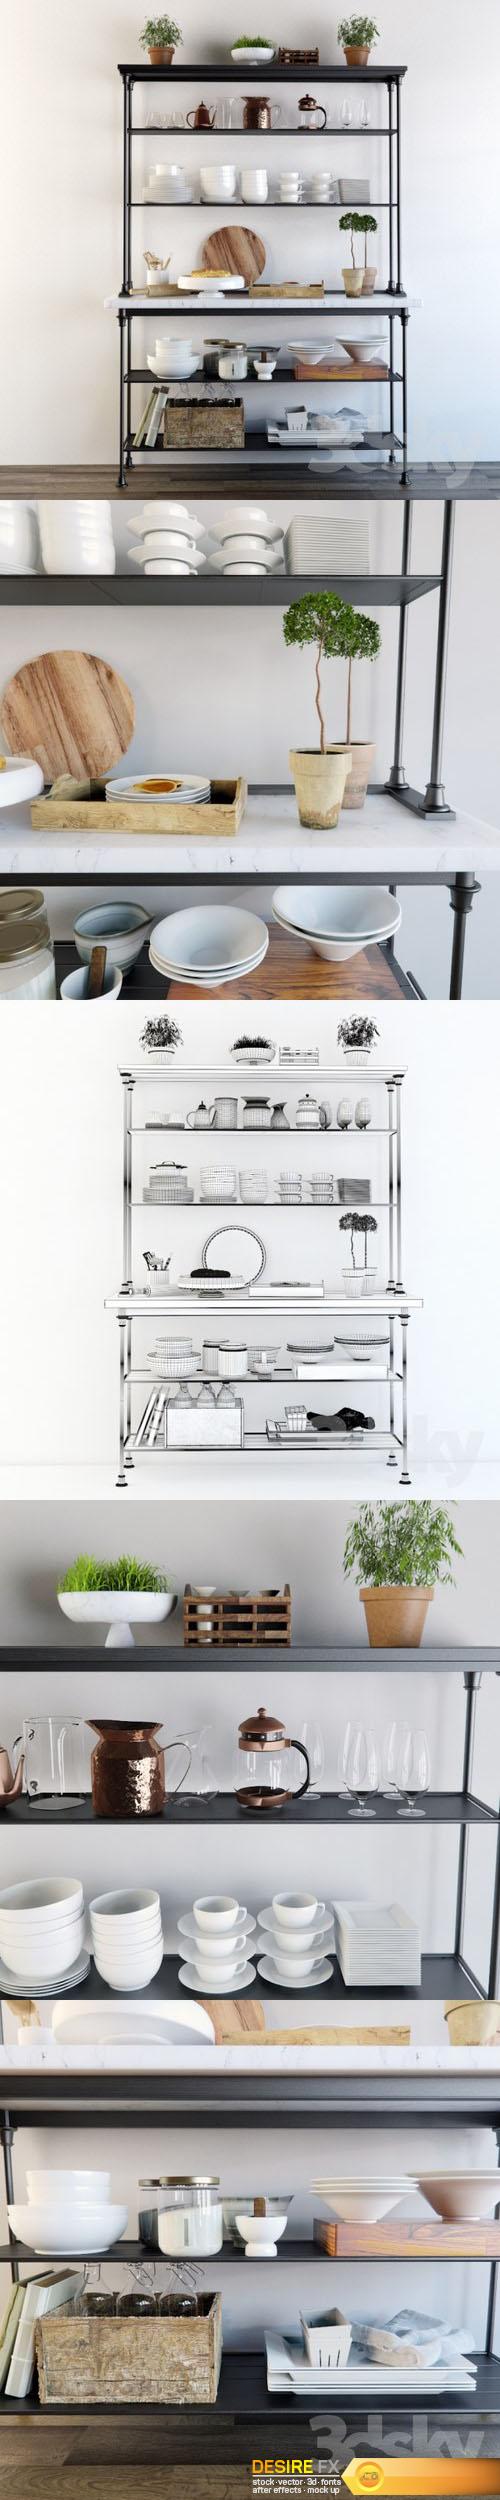 Shelving_in_the_kitchen